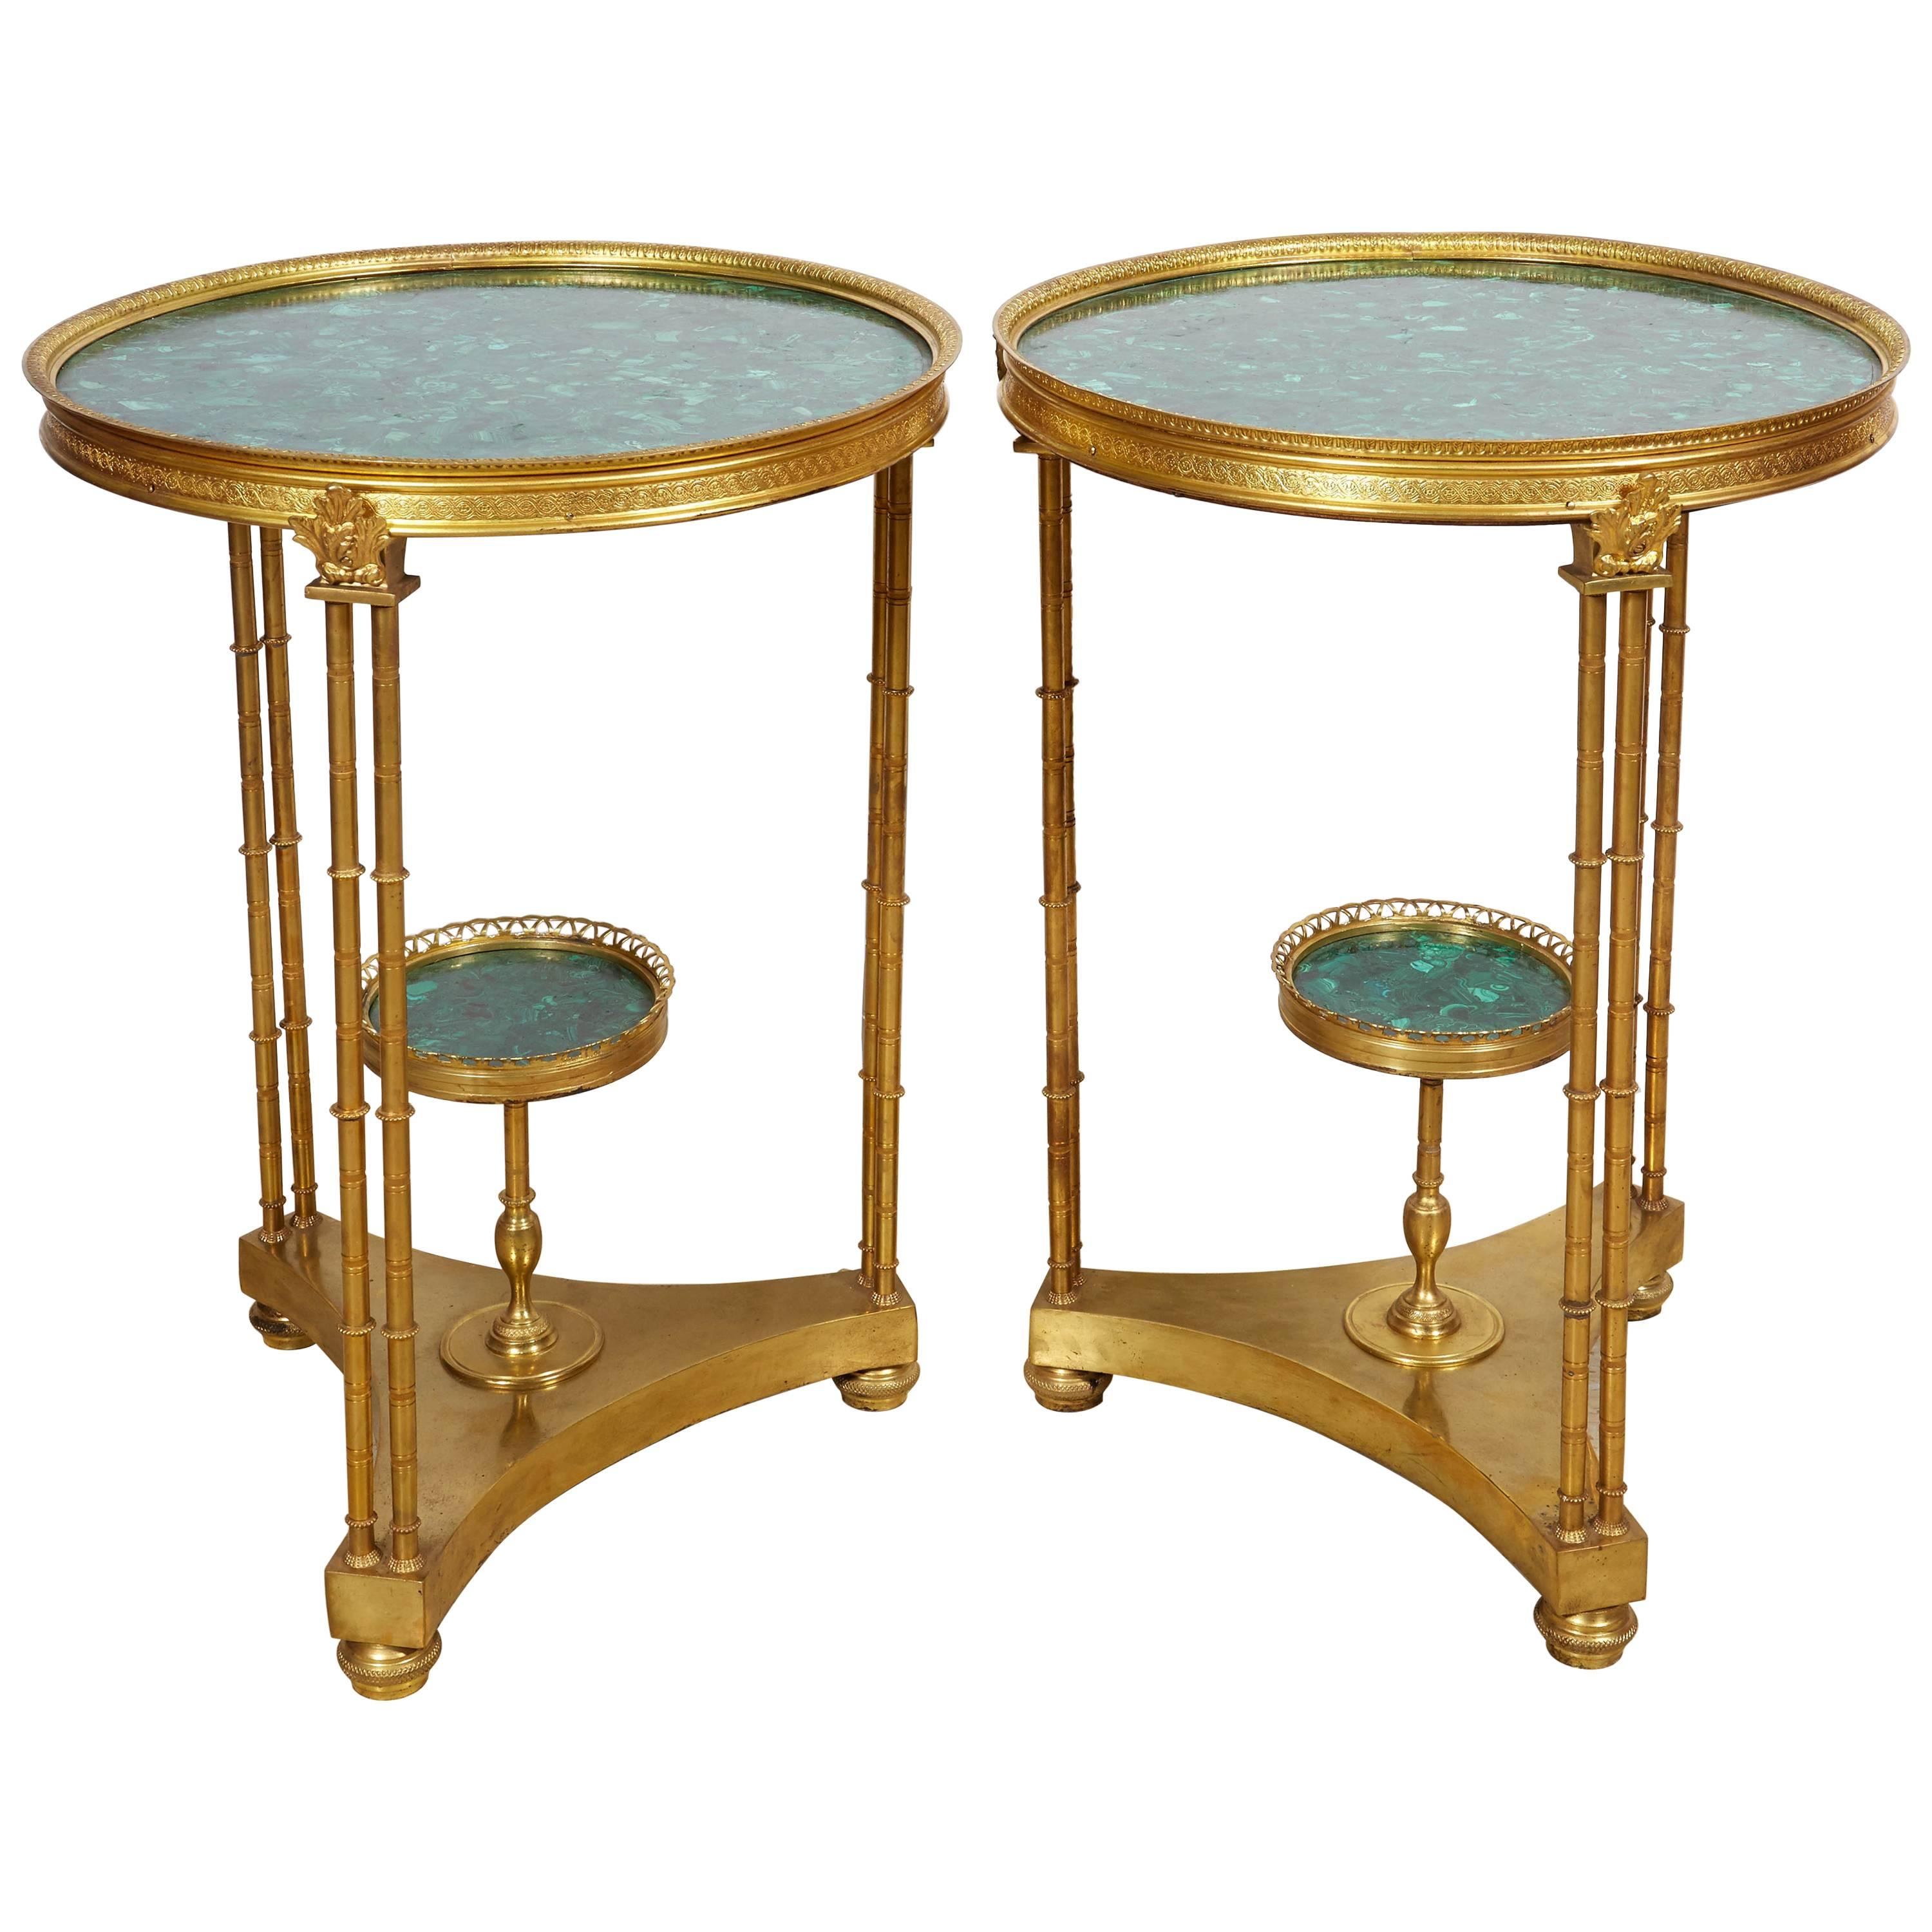 A pair of French Louis XVI style gilt bronze and malachite gueridon tables,
20th century.

Very fancy and decorative pair of side / end tables. 

Will go well in an room!

Measures: 27